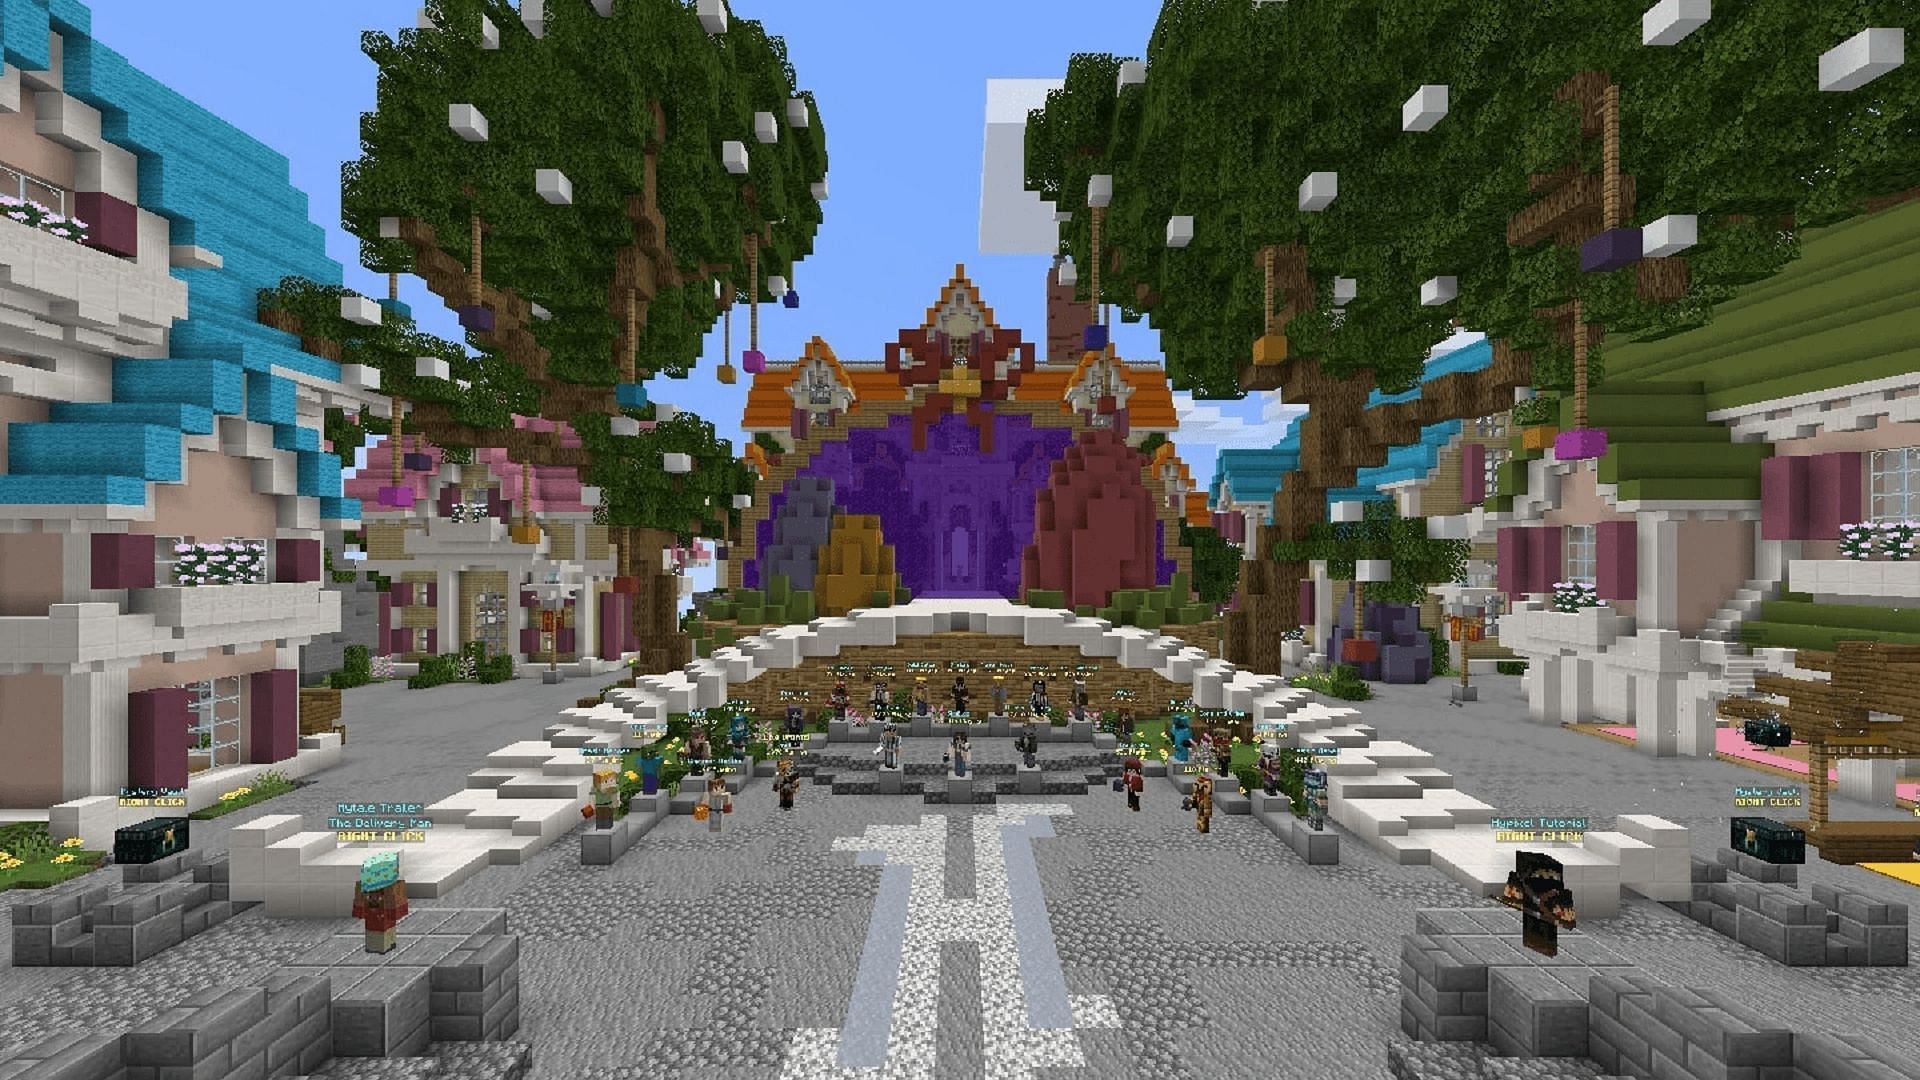 Hypixel is one of the most beloved modded Minecraft servers in the world (Image via Hypixel.net)